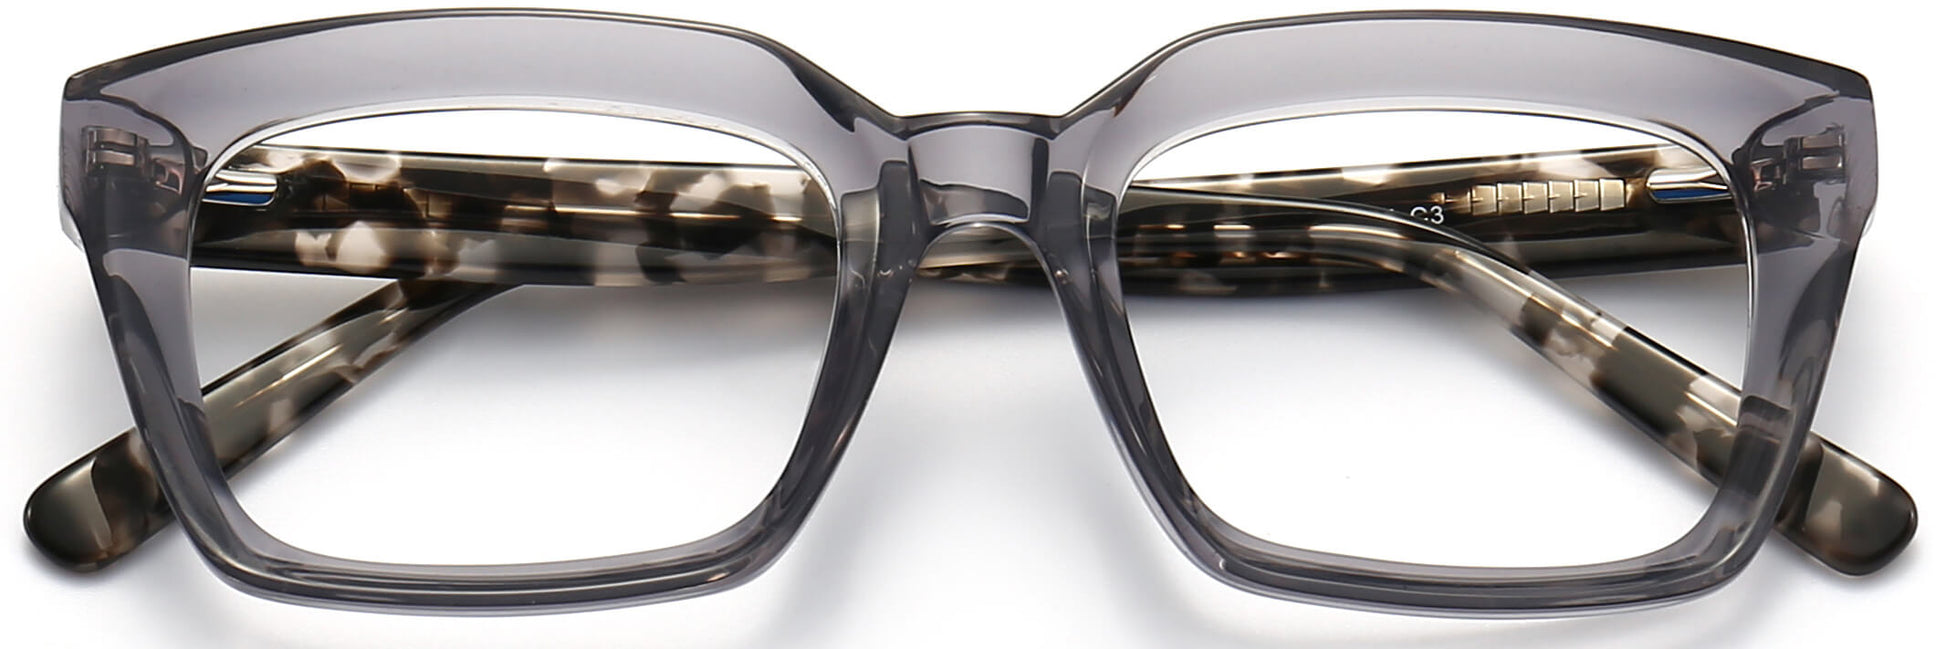 Aron Square Gray Eyeglasses from ANRRI, closed view